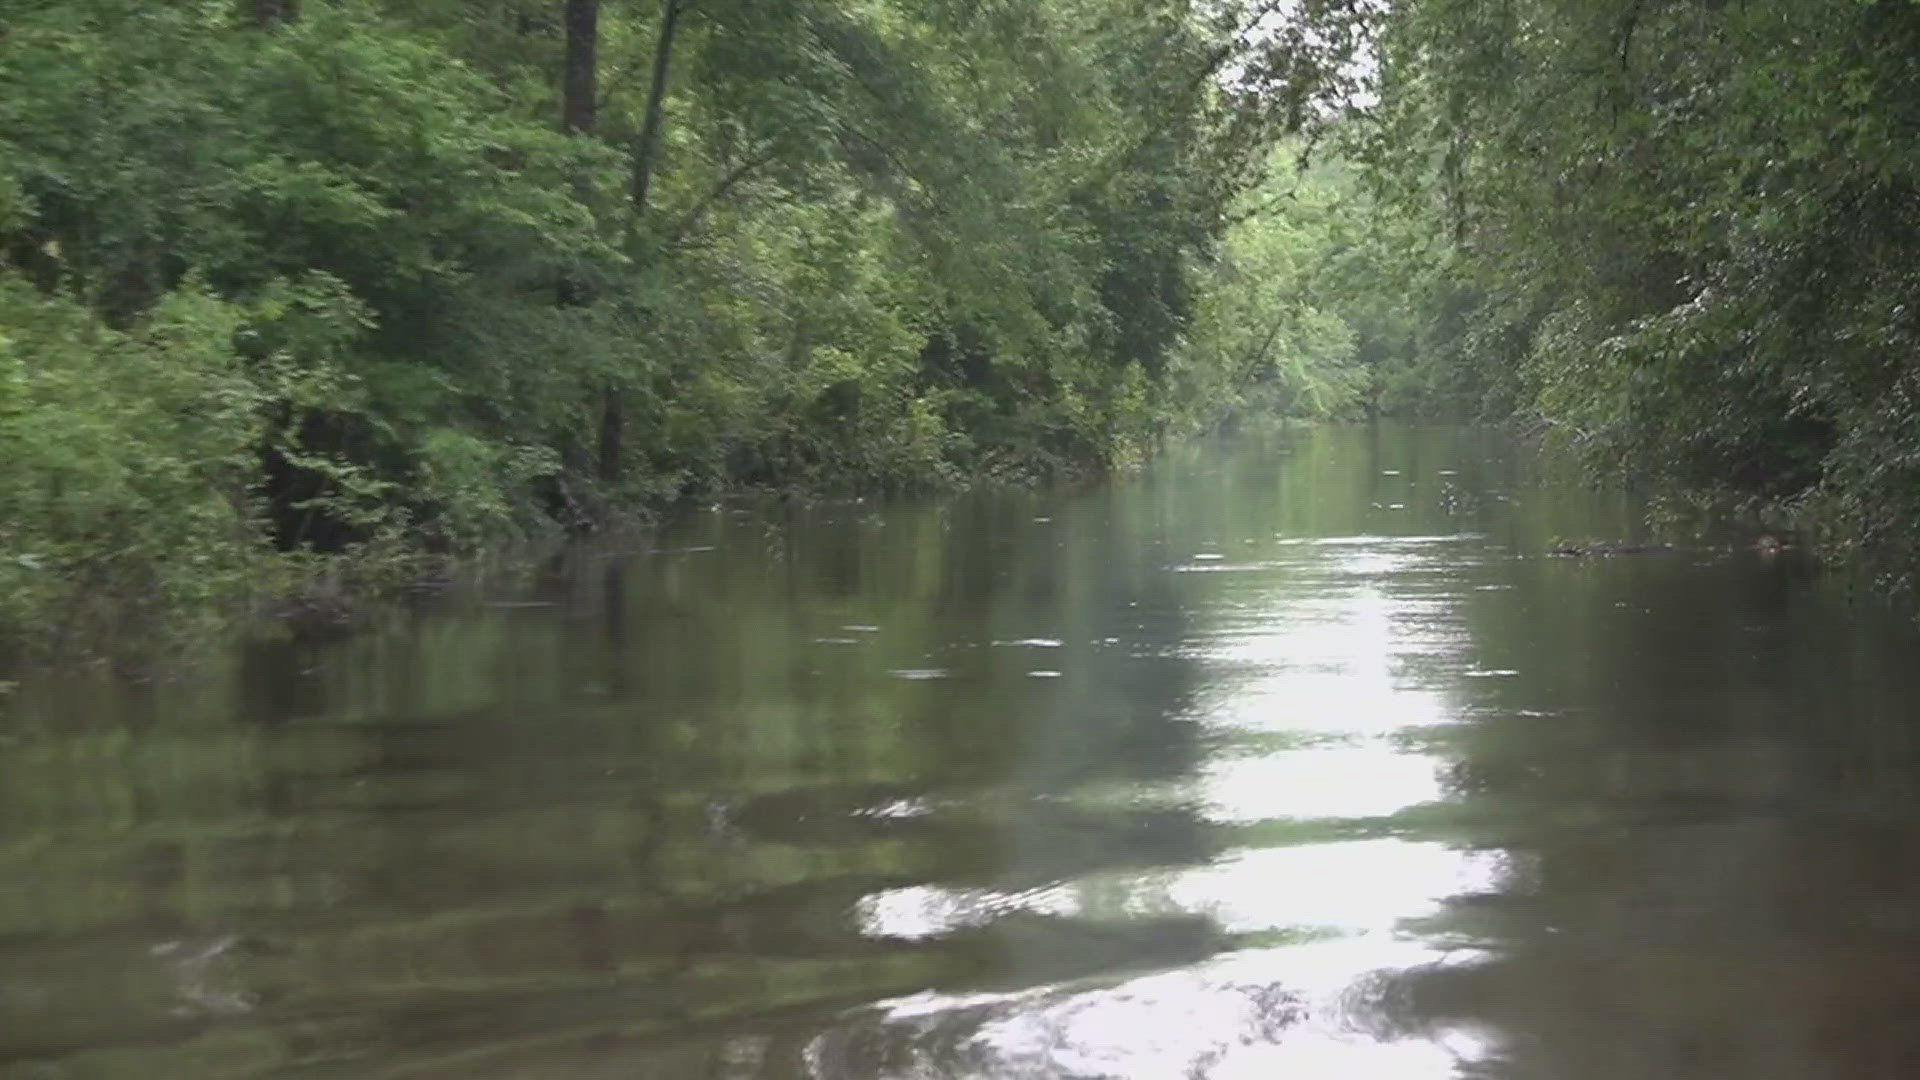 In less than a month, Deweyville and surrounding areas have found themselves overwhelmed by rising water levels of the Sabine River.